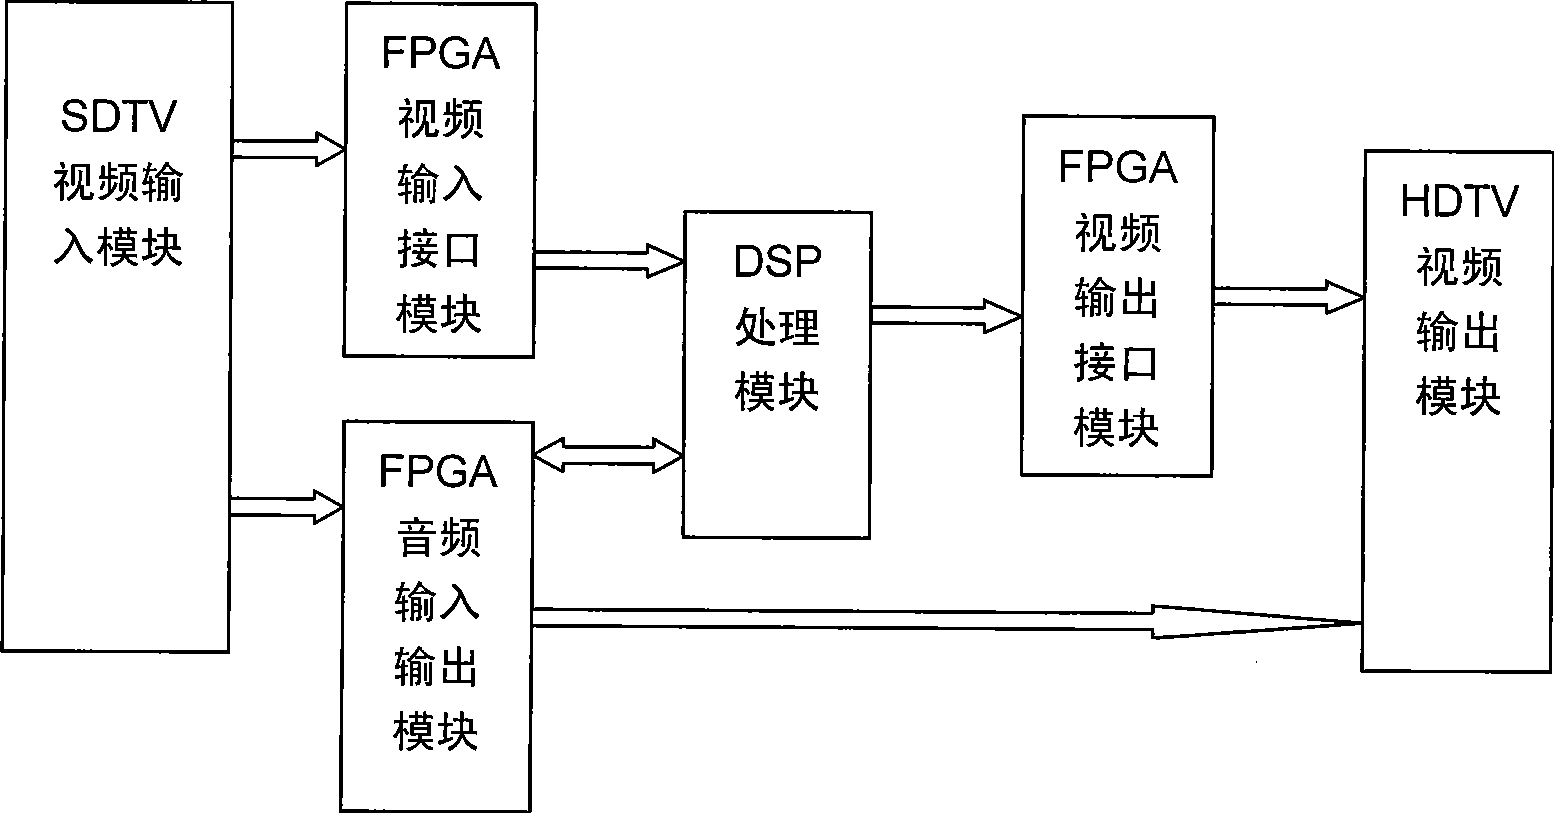 Apparatus for realizing conversion from standard definition video to high definition video using 4DSP processor